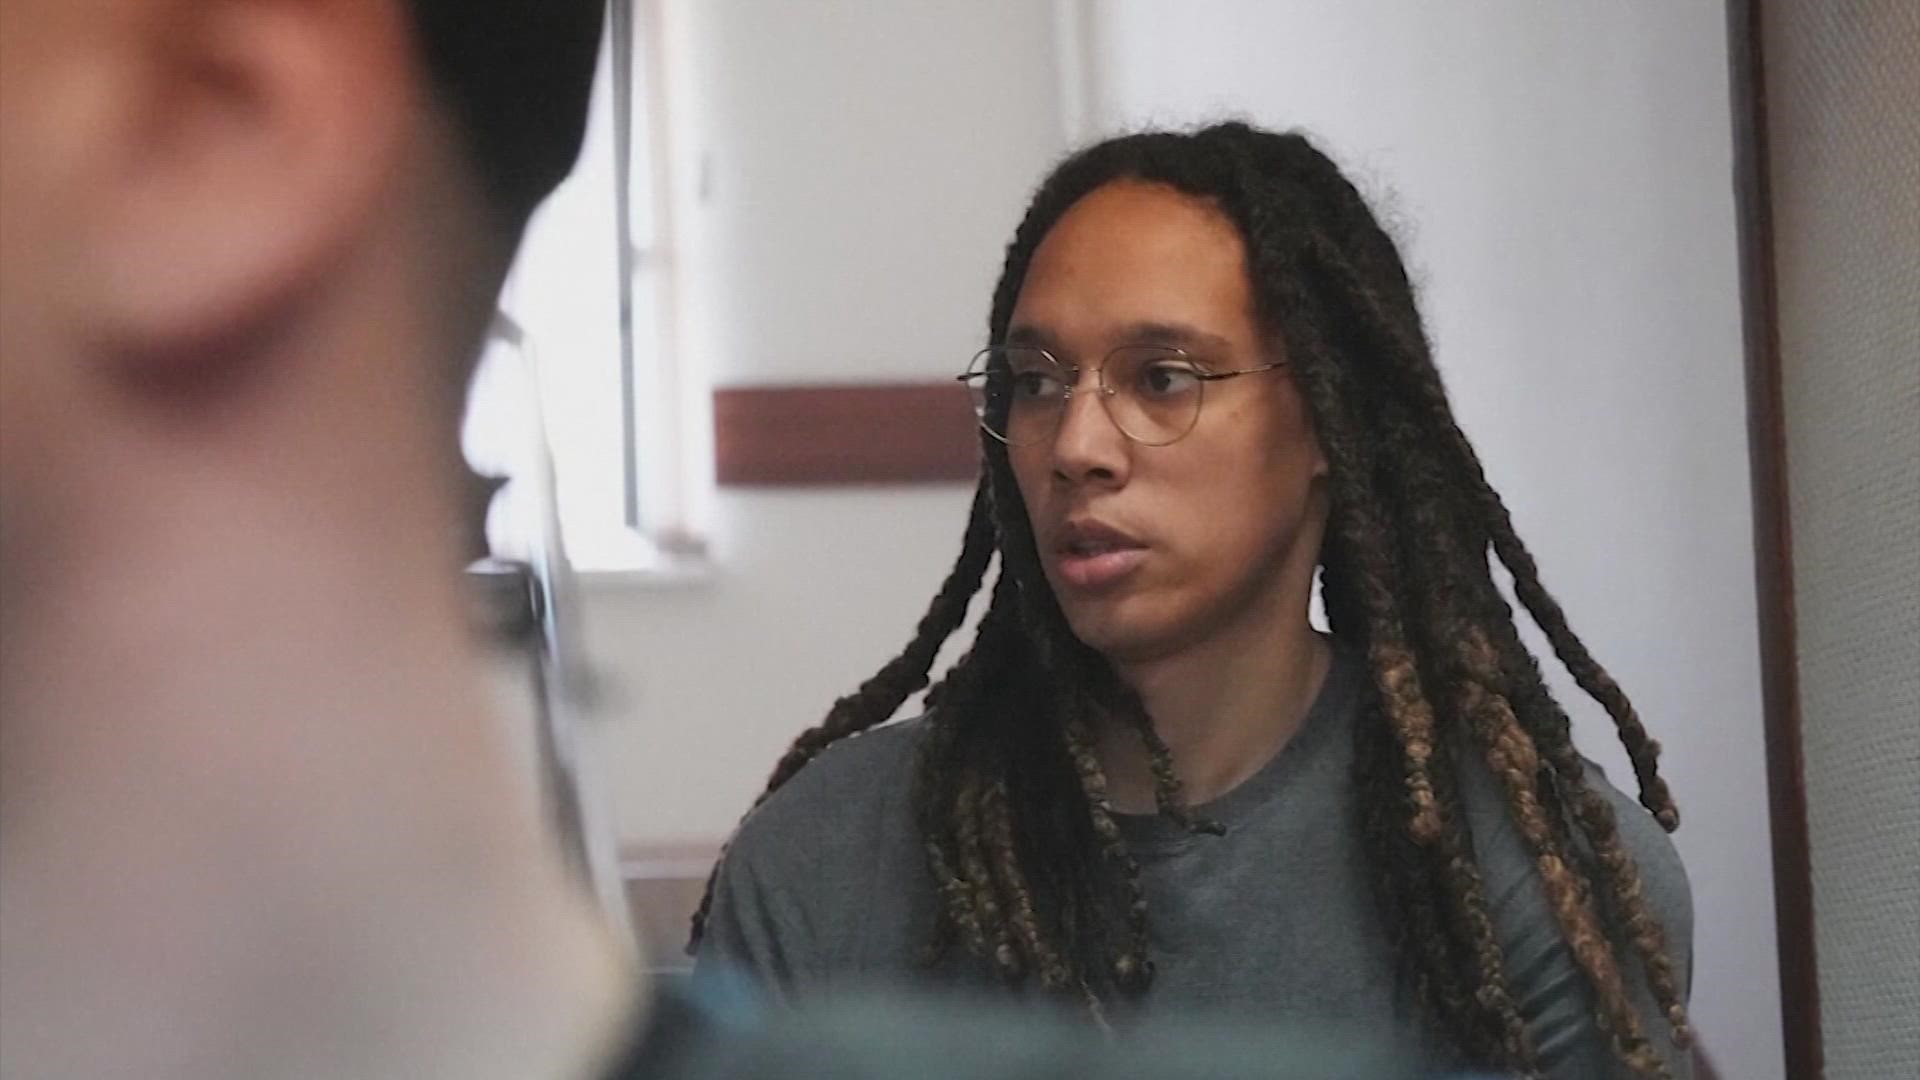 Russia freed Houston native and WNBA star Brittney Griner on Thursday in a dramatic high-level prisoner exchange.